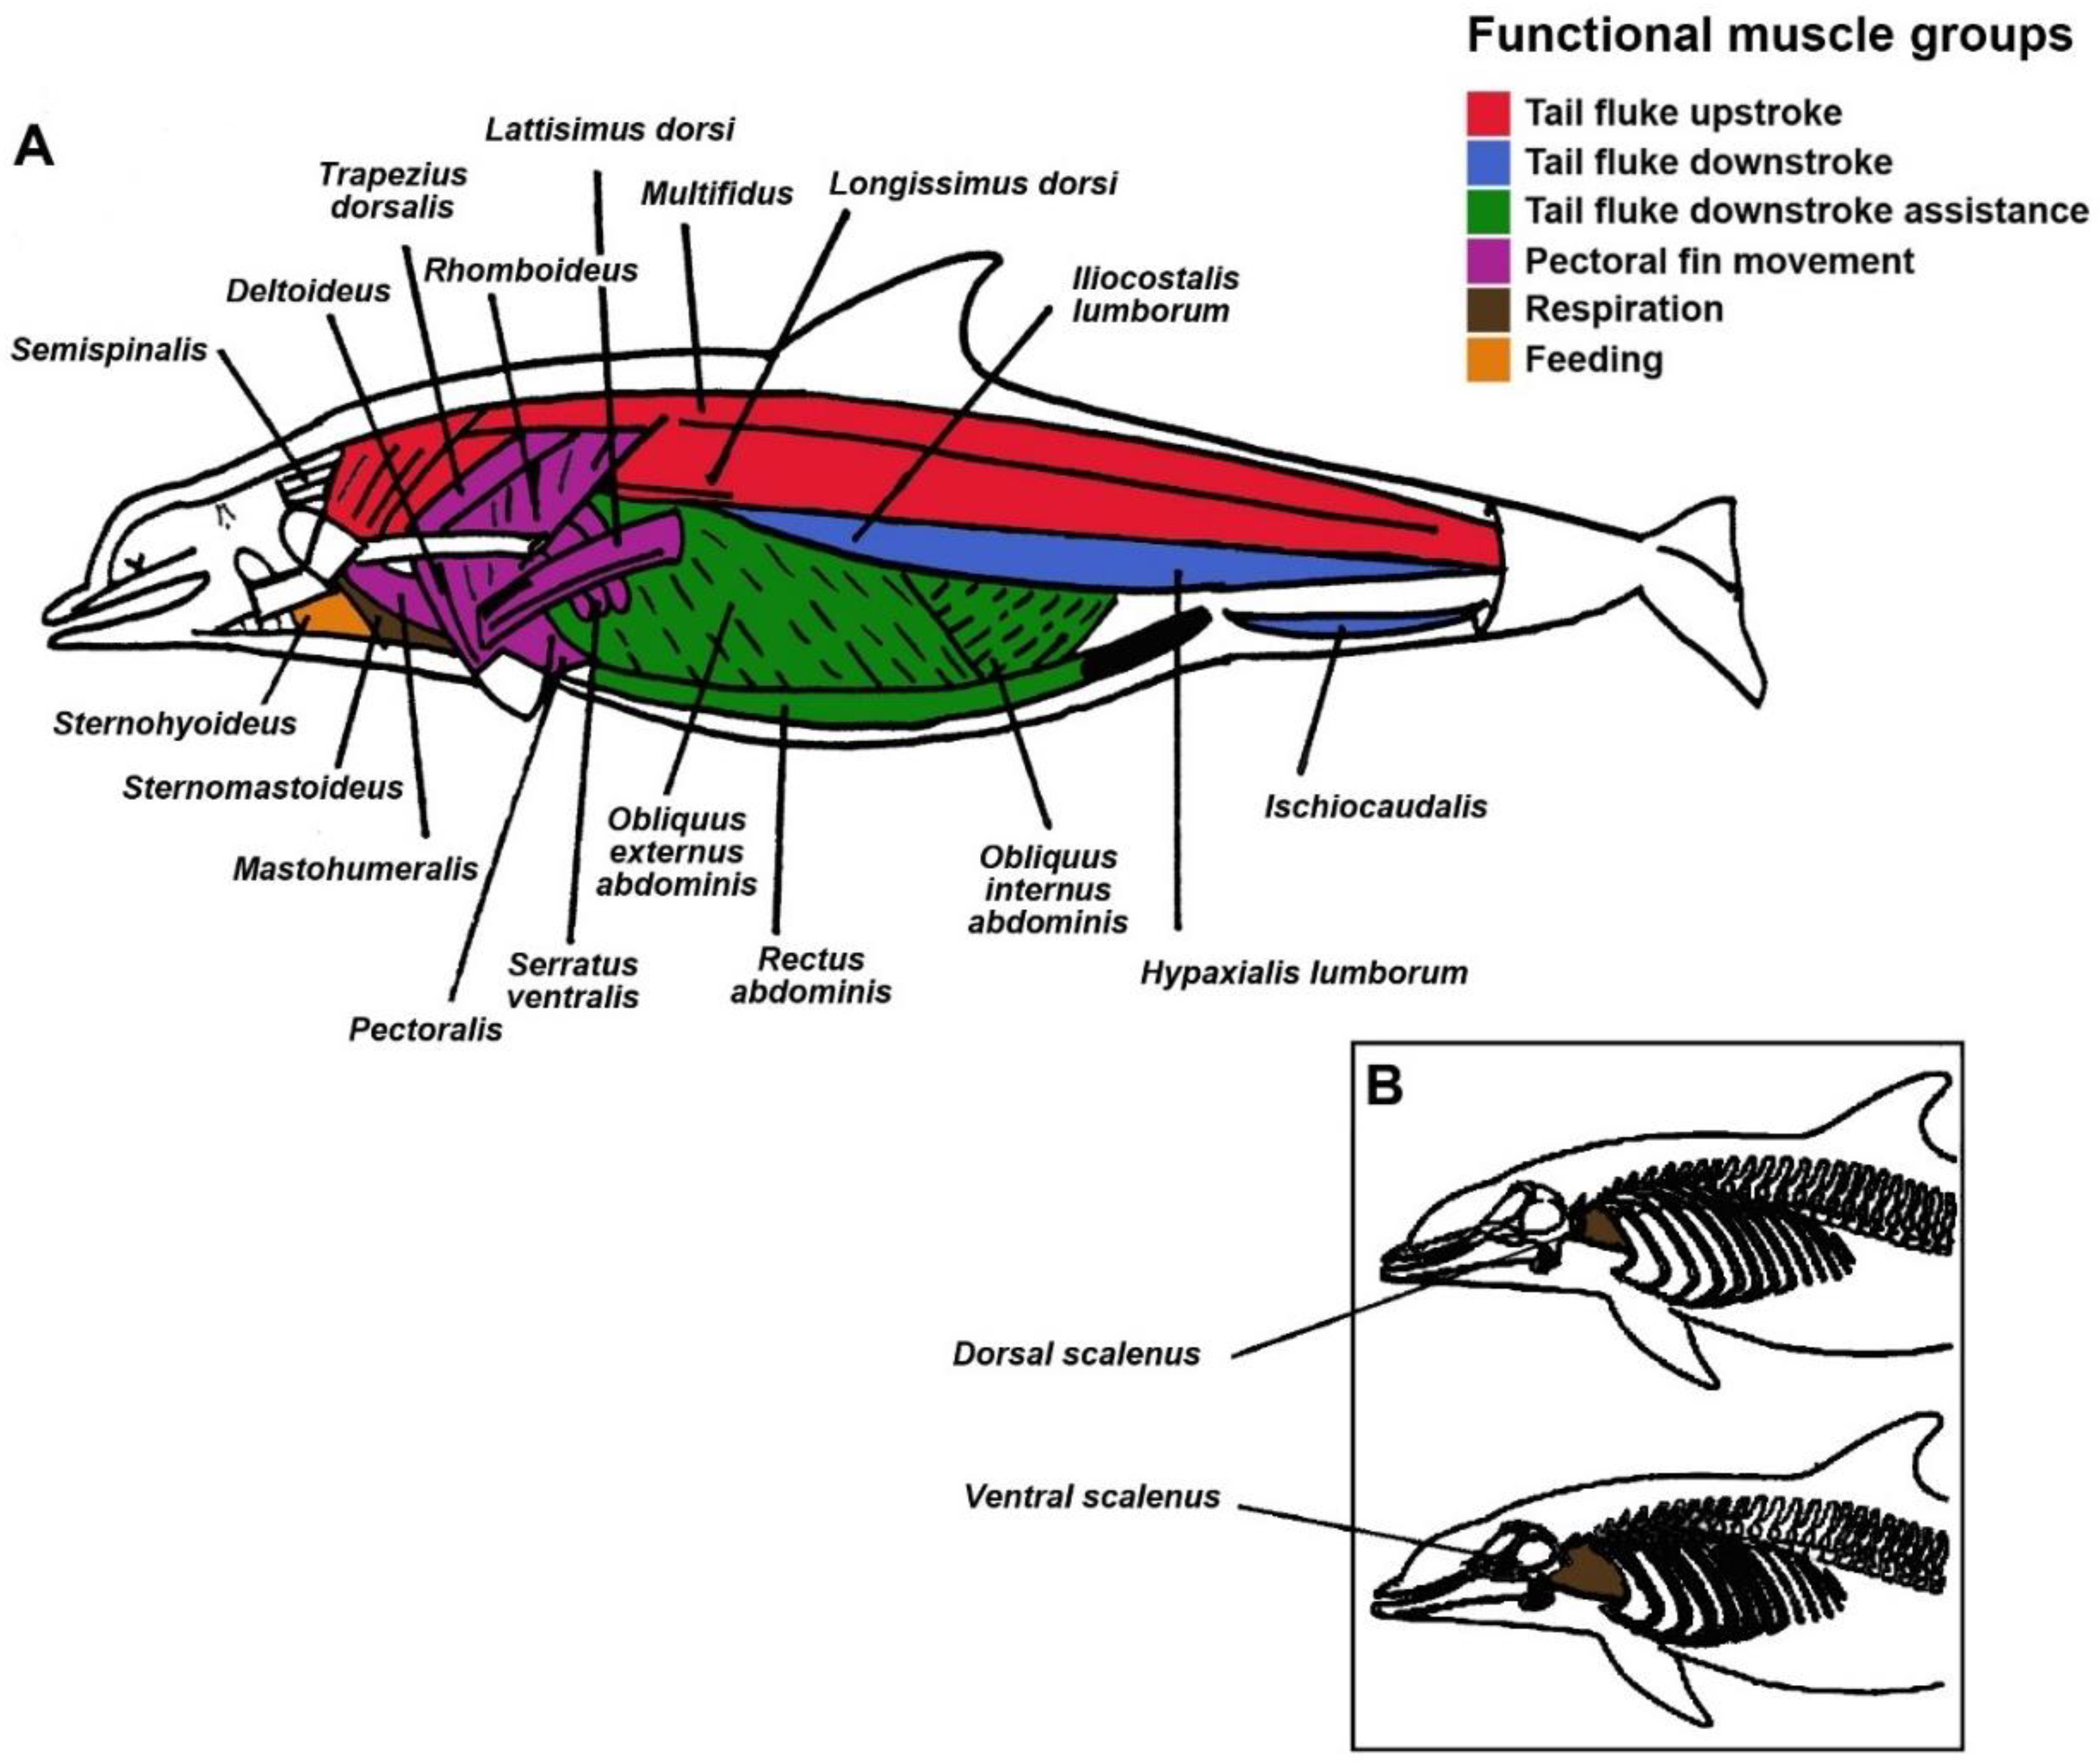 Animals | Free Full-Text | Myoglobin Concentration and Oxygen Stores in  Different Functional Muscle Groups from Three Small Cetacean Species